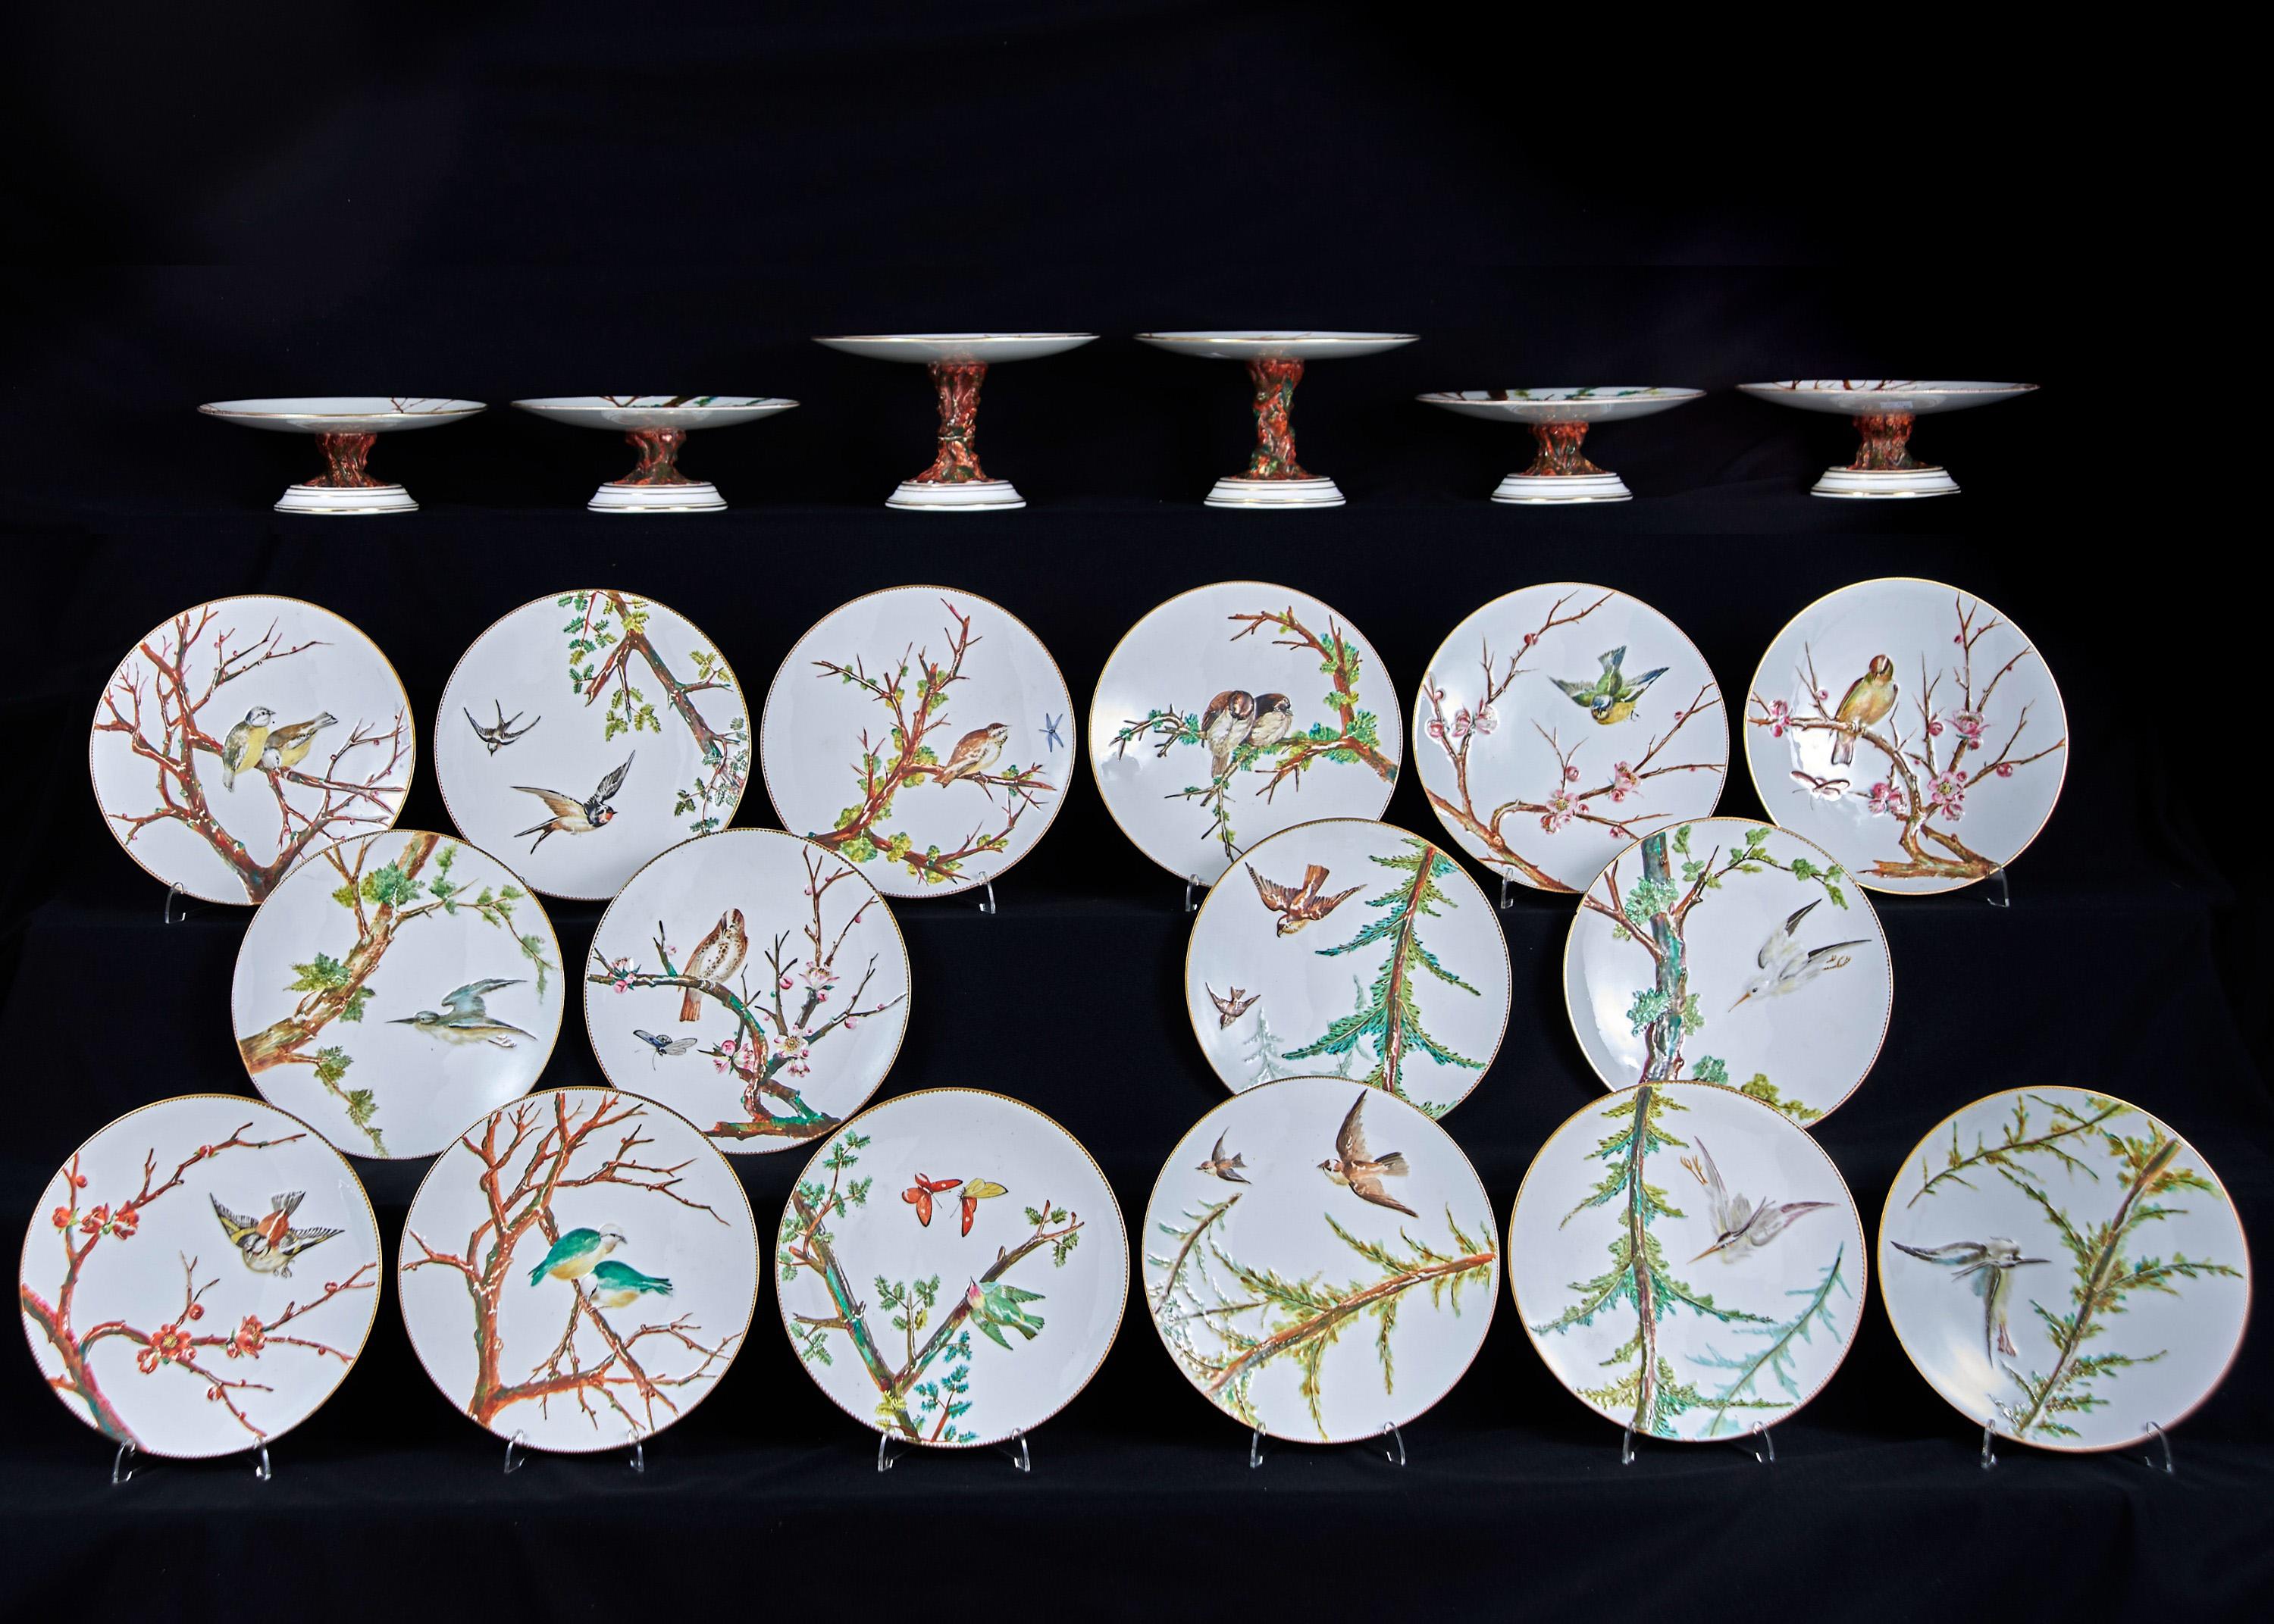 An outstanding and rare E J D Bodley relief moulded bone China dessert service, Circa 1880, enamelled with birds on branches in gilt dentil rim, the four low and two high stands on rustic foot. Each piece is impressive with flying birds and birds